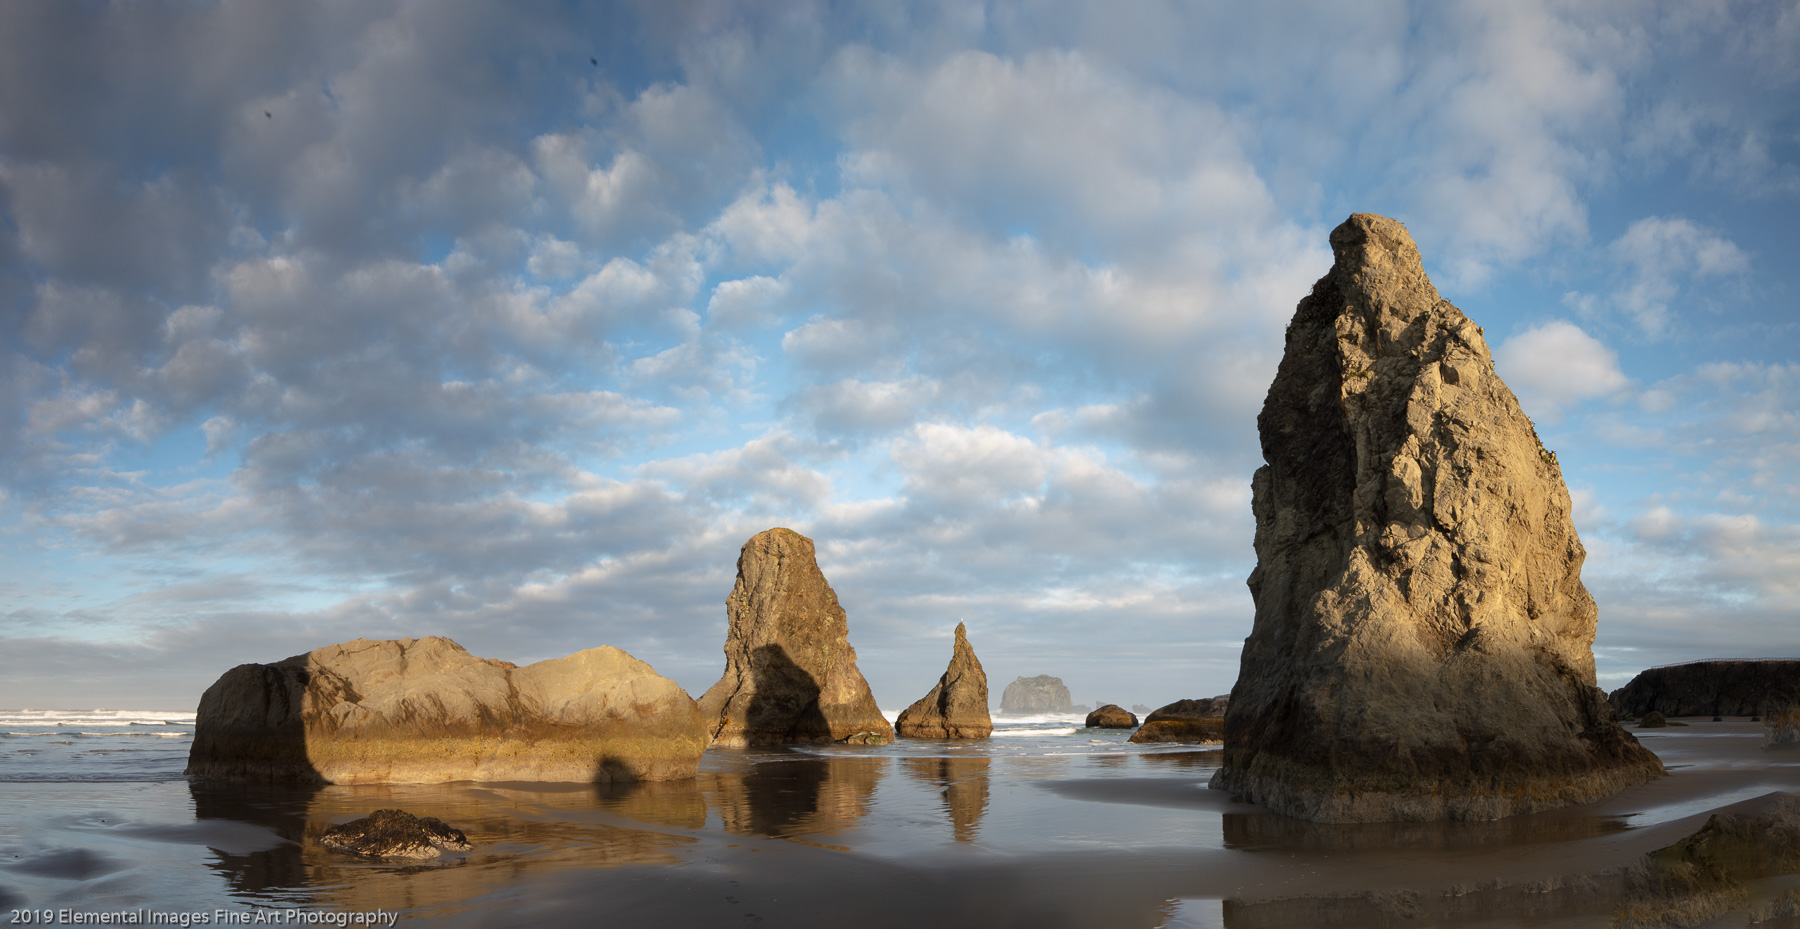 Bandon Sea Stacks | Bandon | OR | USA - © 2019 Elemental Images Fine Art Photography - All Rights Reserved Worldwide